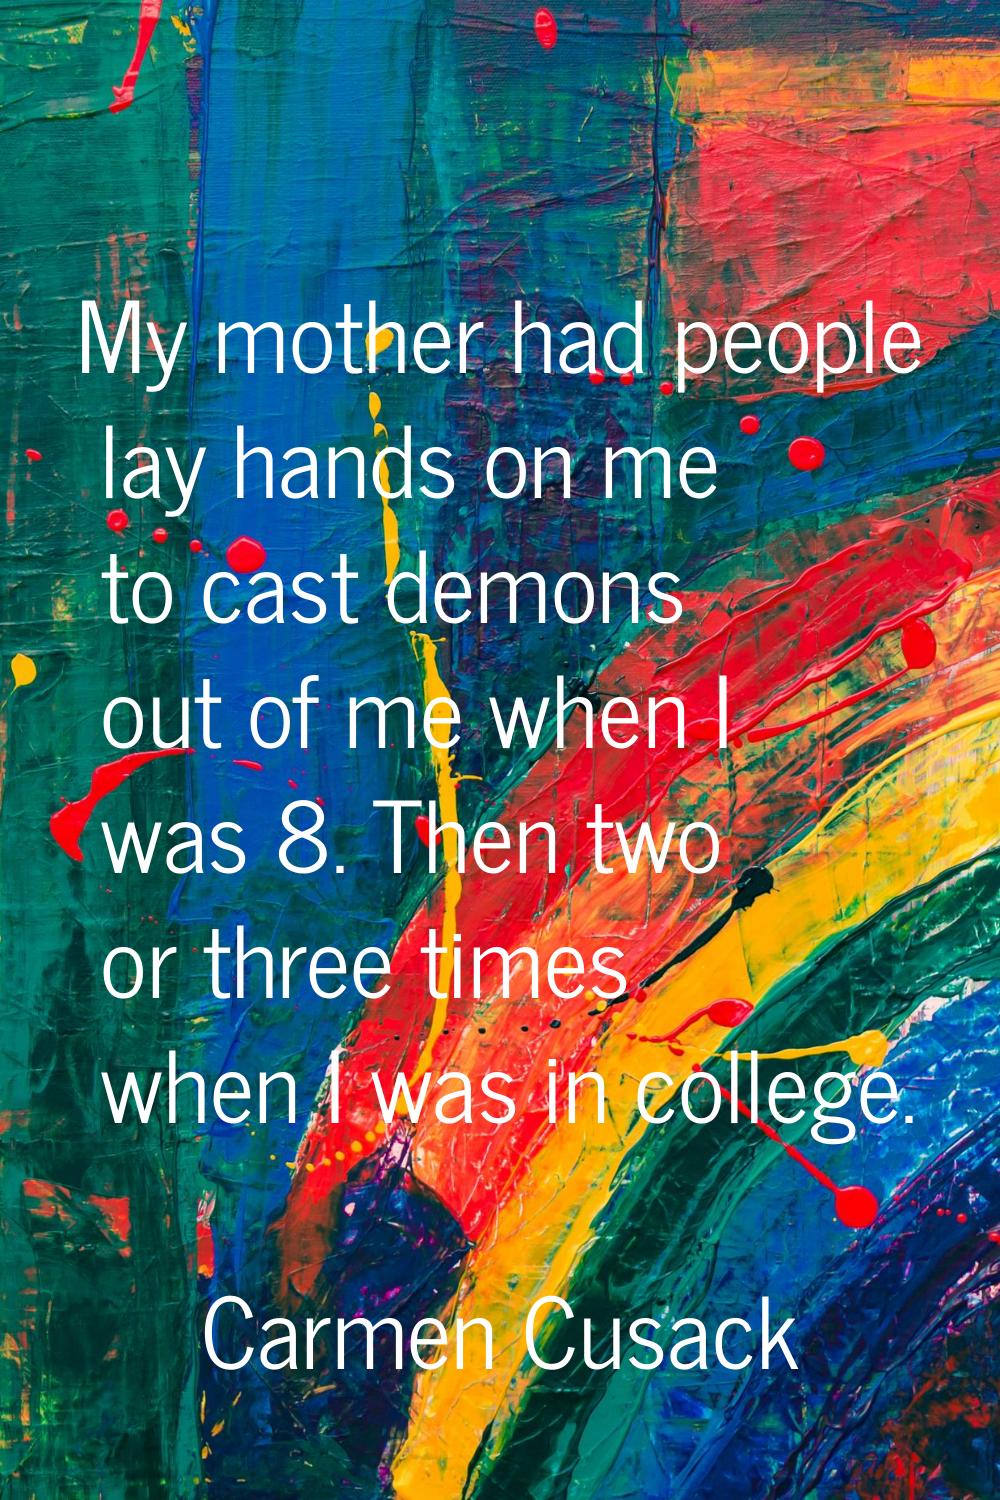 My mother had people lay hands on me to cast demons out of me when I was 8. Then two or three times